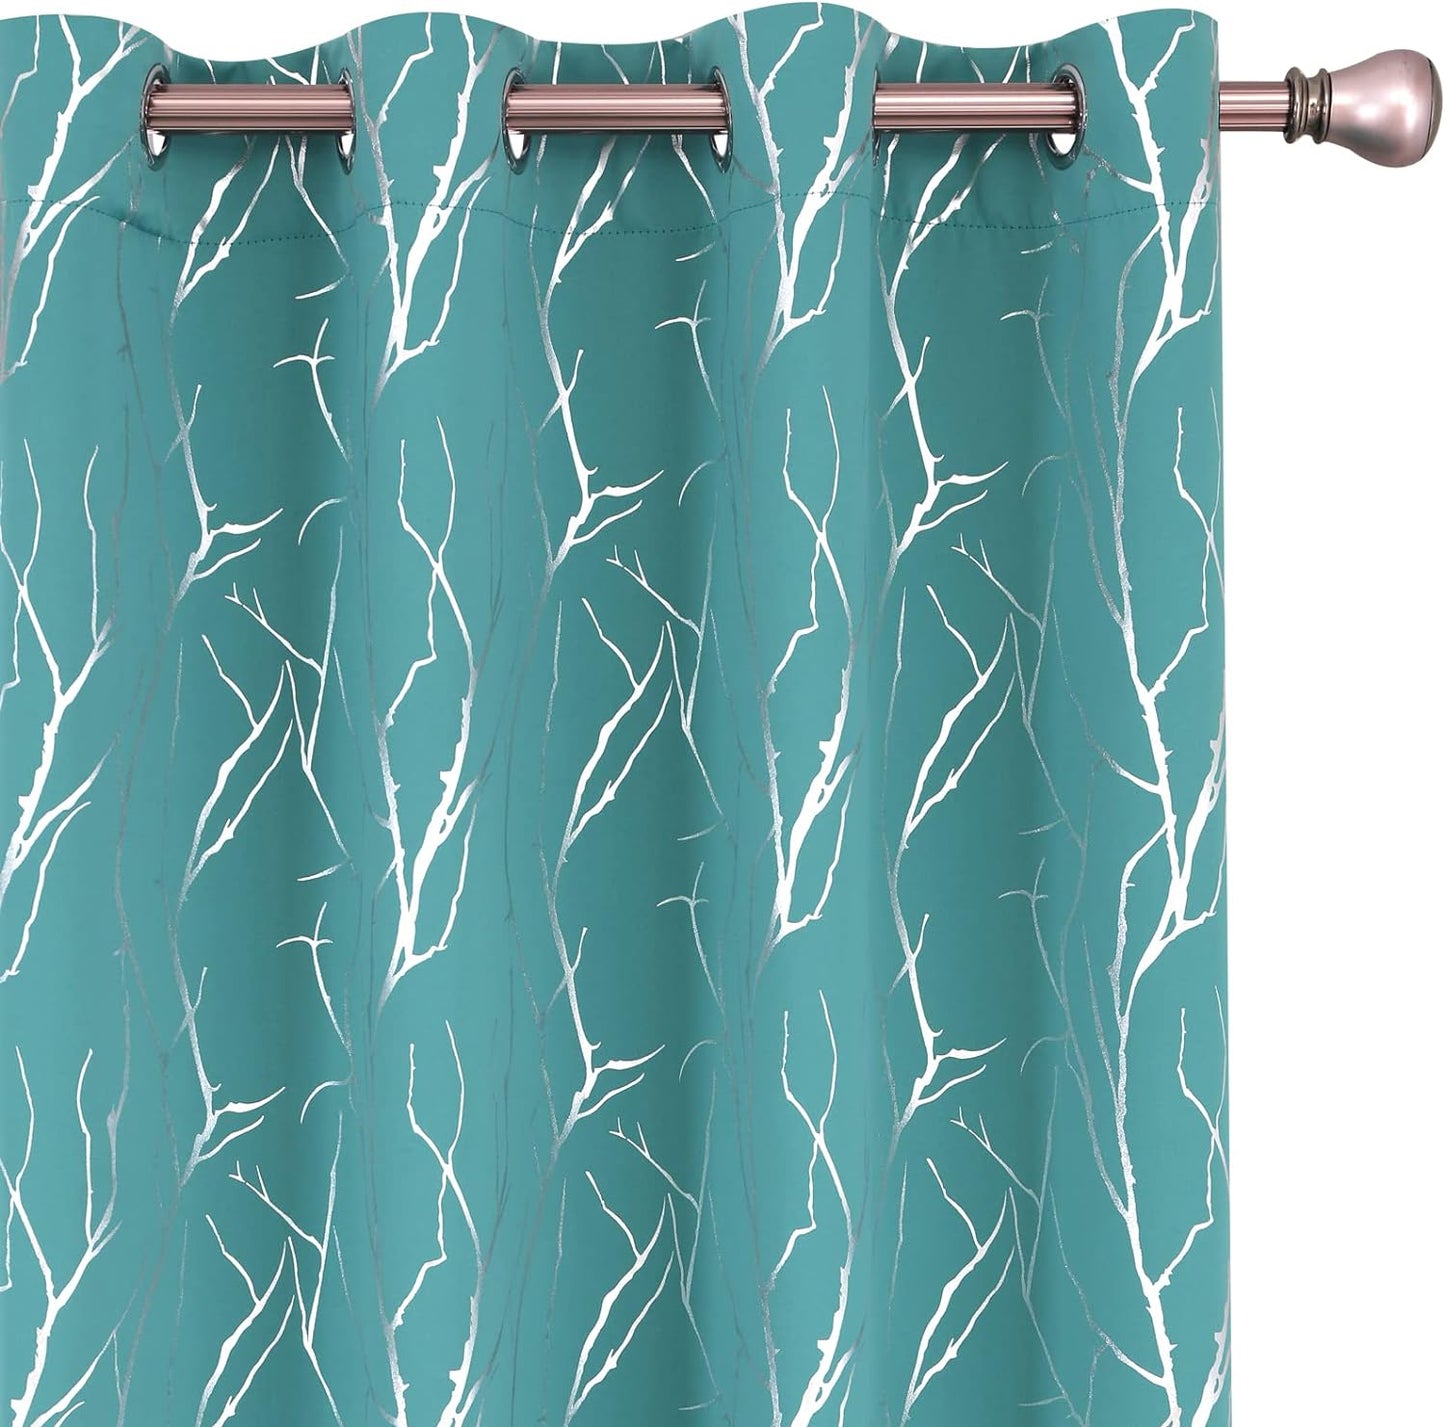 SMILE WEAVER Black Blackout Curtains for Bedroom 72 Inch Long 2 Panels,Room Darkening Curtain with Gold Print Design Noise Reducing Thermal Insulated Window Treatment Drapes for Living Room  SMILE WEAVER Tree Branch-Turquoise 52Wx84L 